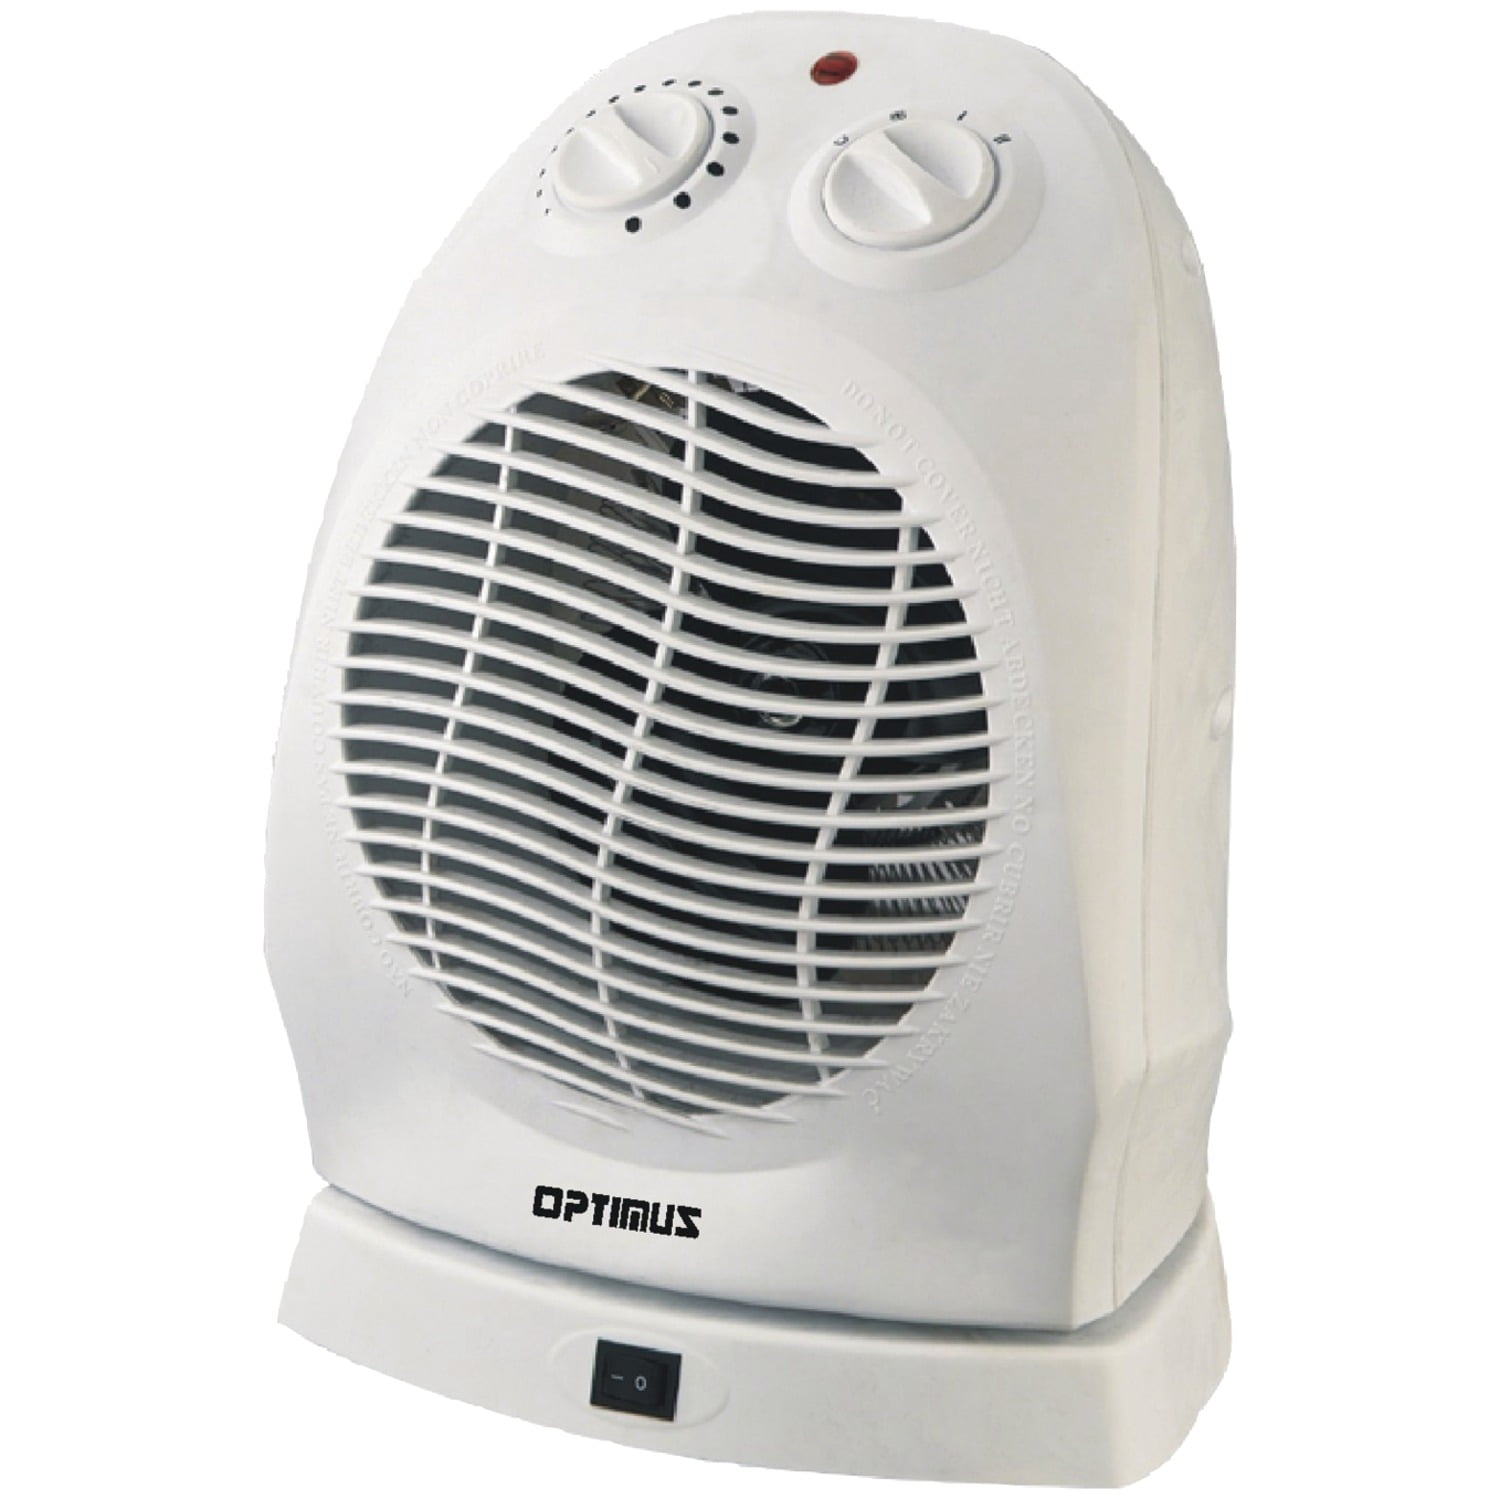 Optimus Portable 2-Speed Fan Heater with Thermostat 